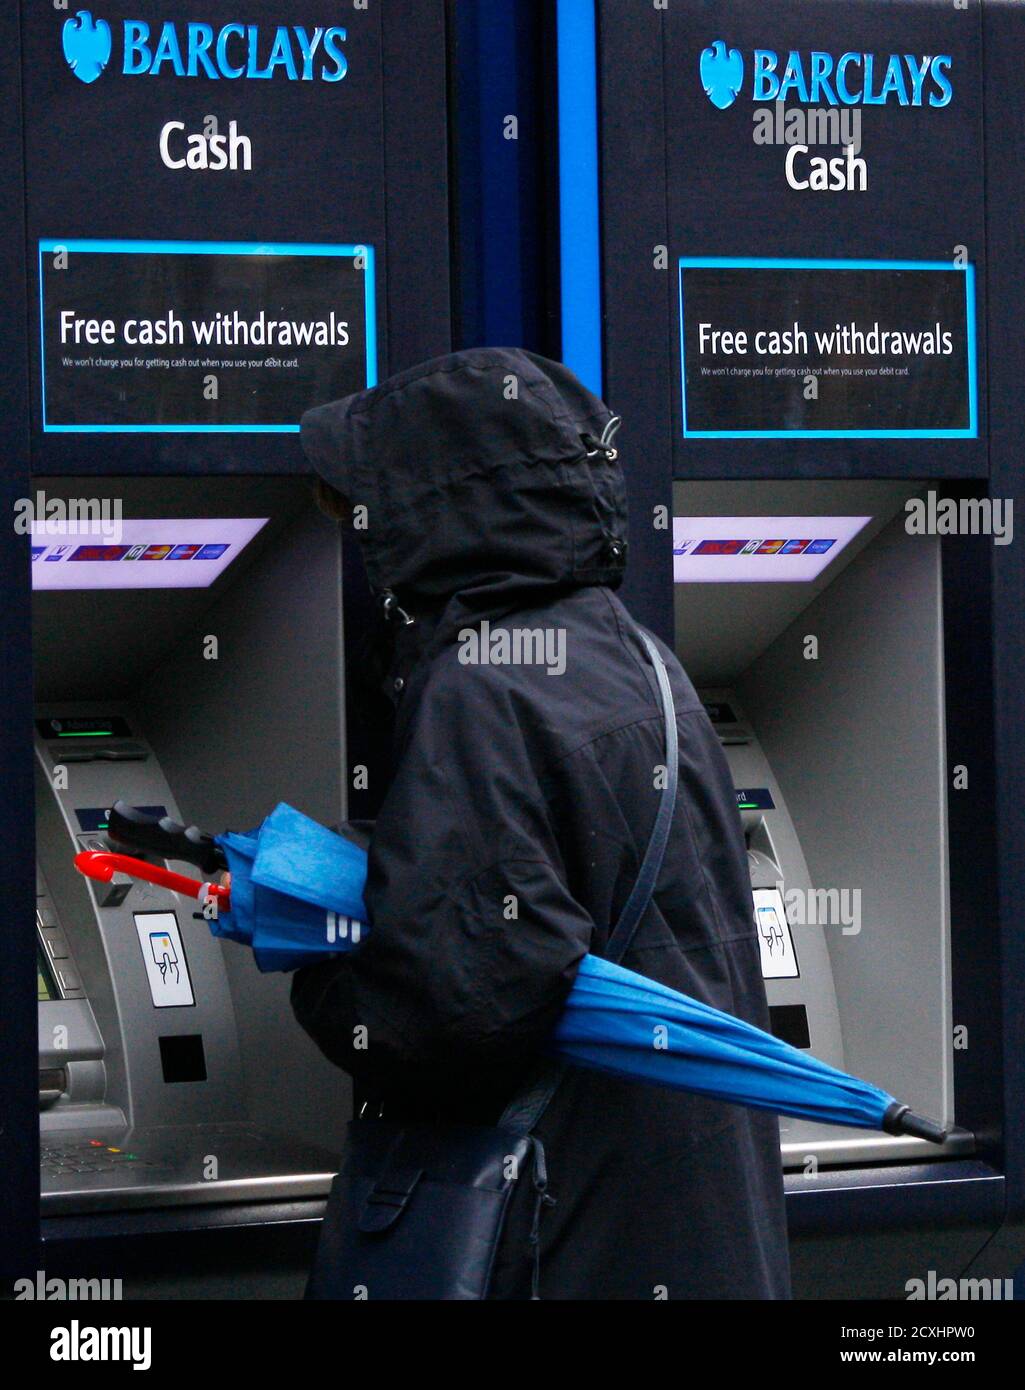 A woman uses a cash machine at a Barclays bank in Altrincham, northern England April 26, 2012. Barclays posted a 22 percent rise in first-quarter profit, ahead of market forecasts, as a strong rebound in revenue from its investment banking arm and a drop in bad debt countered increased compensation for insurance mis-selling.  REUTERS/Phil Noble (BRITAIN - Tags: BUSINESS EMPLOYMENT) Stock Photo